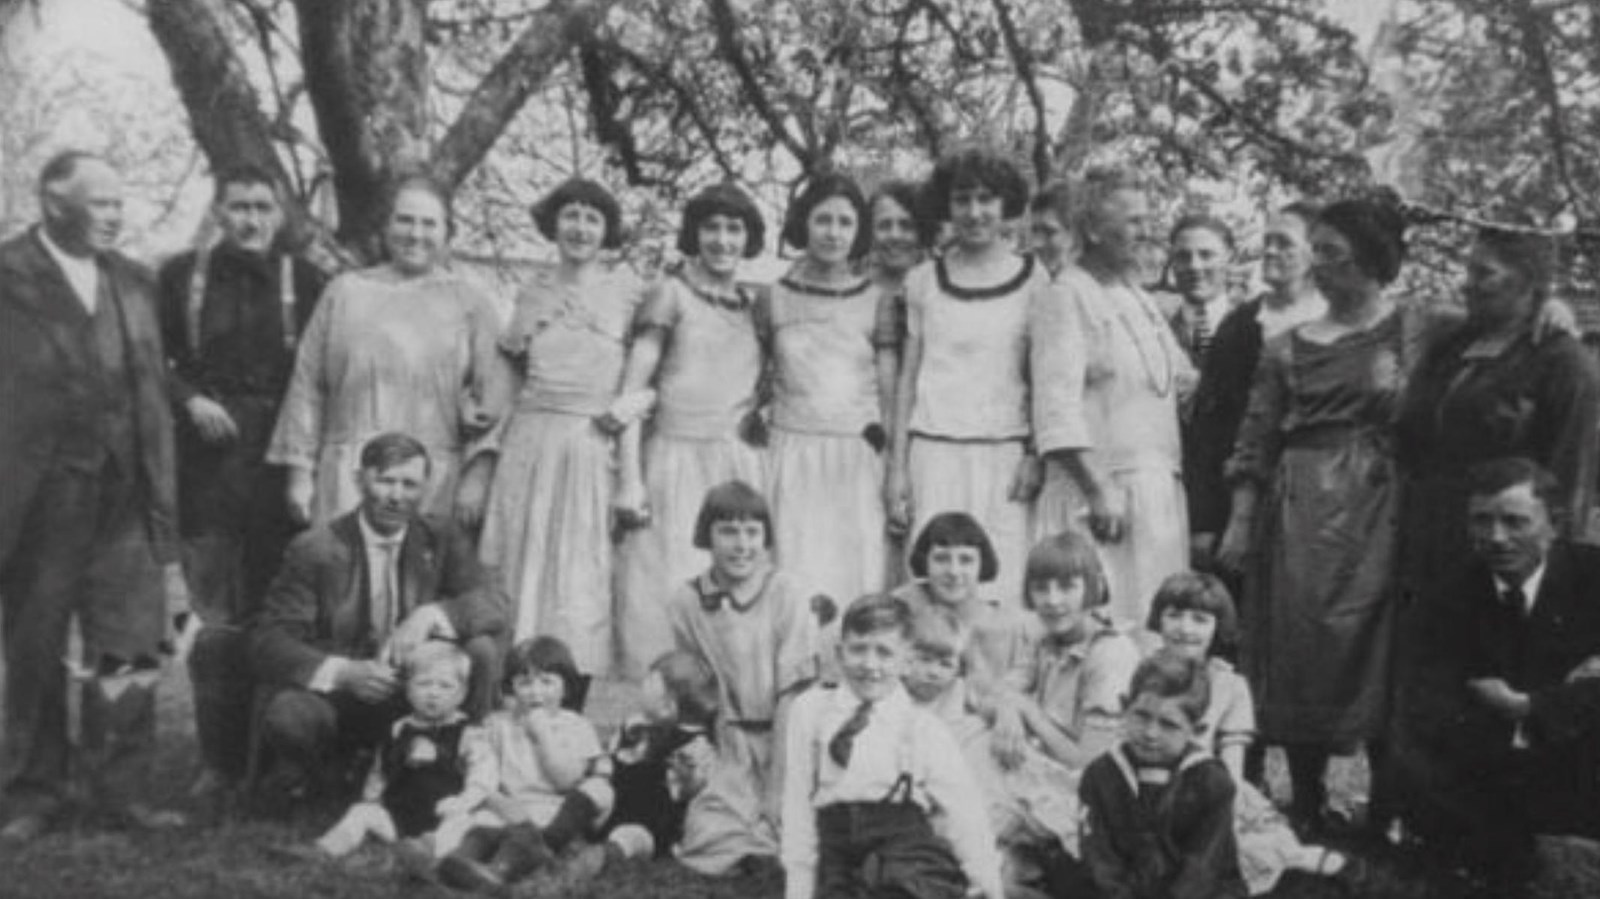 Black and white photograph of a large family assembled outdoors